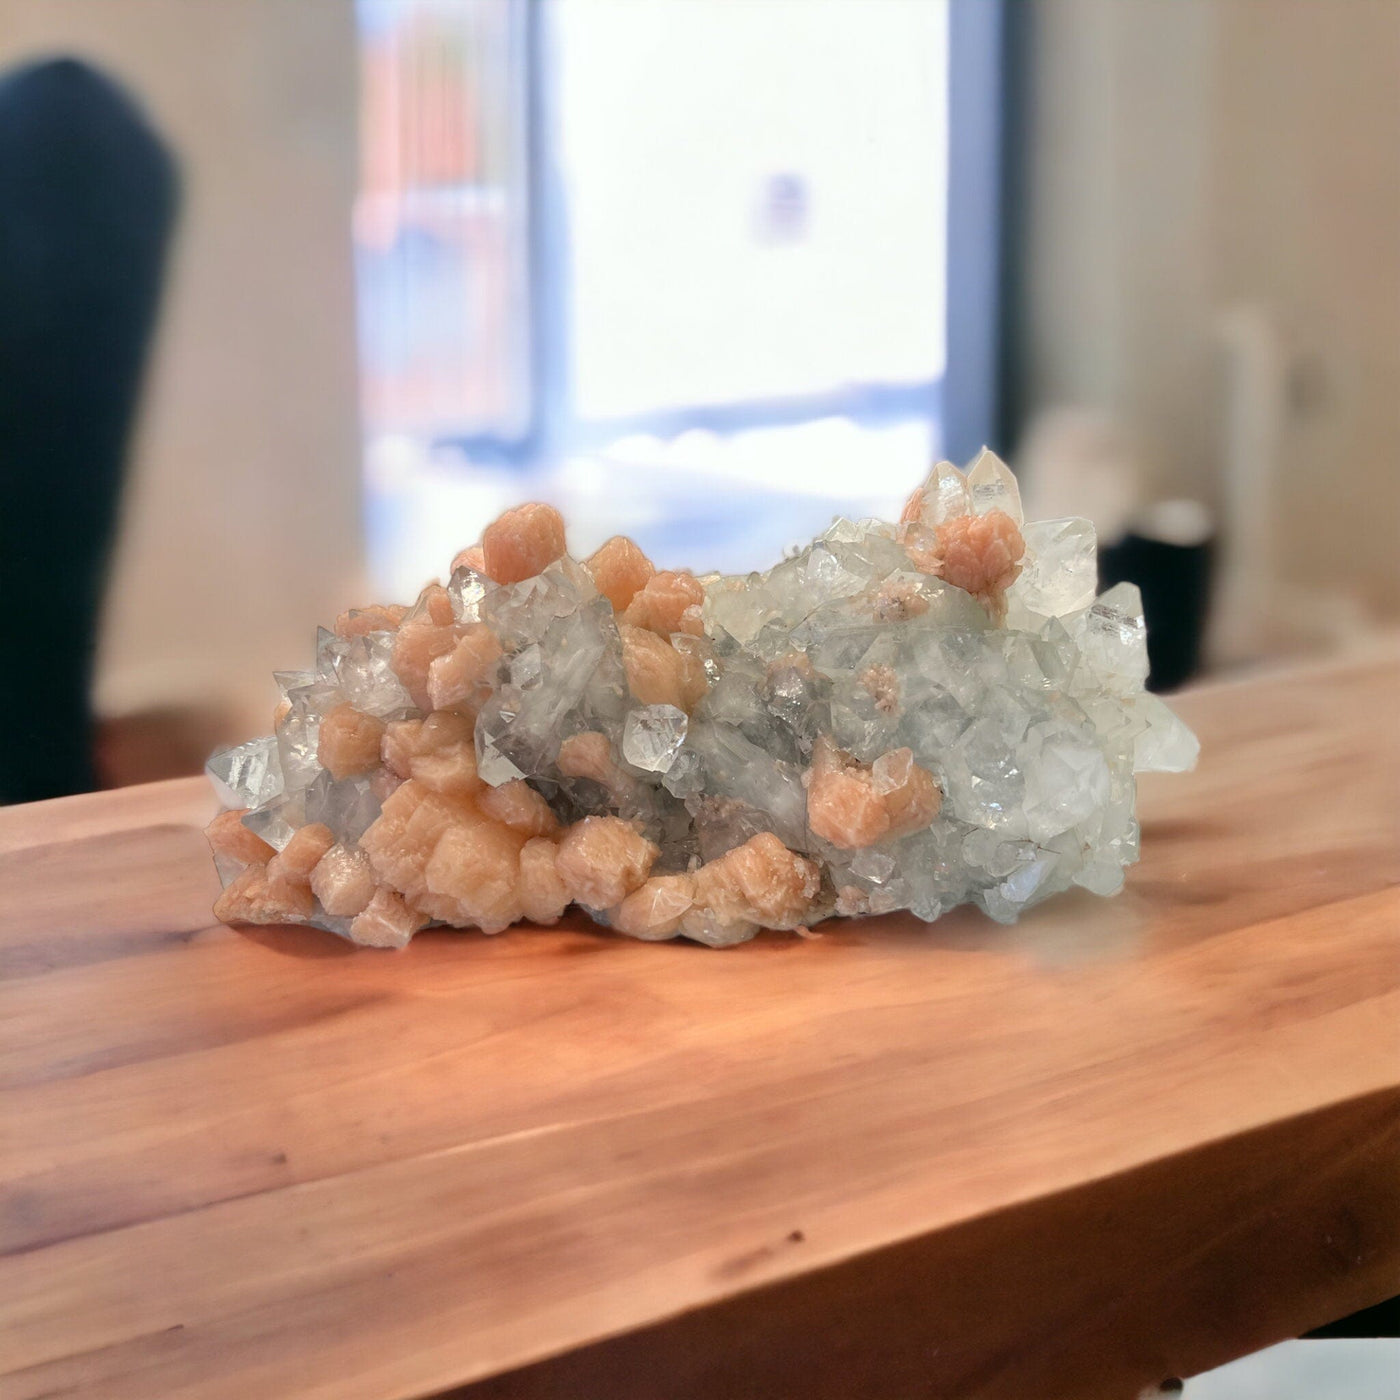 Large zeolite cluster with apophyllite and peach stillbite crystals on a wood counter.